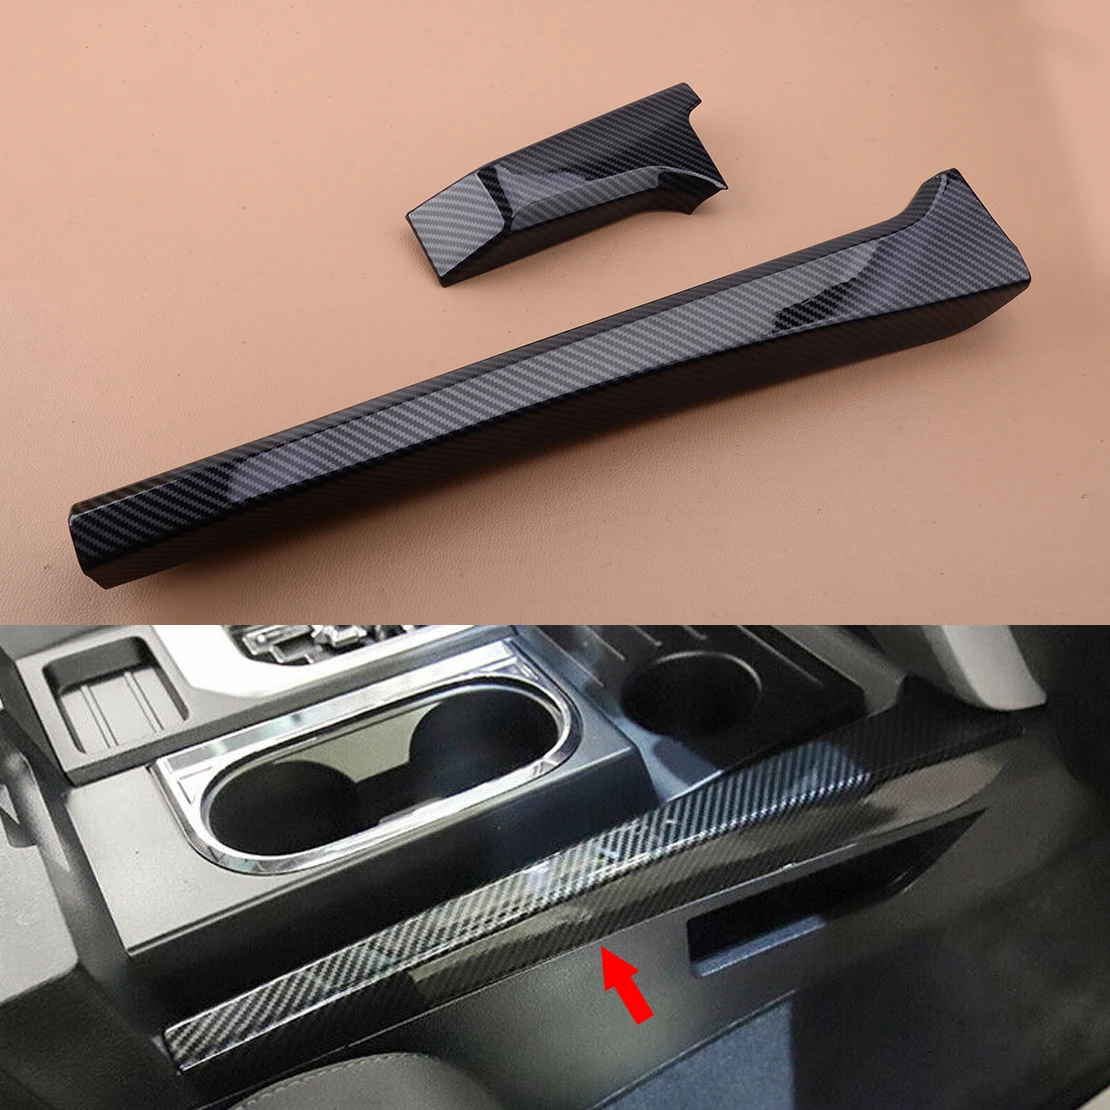 

2Pcs ABS LHD Car Gear Shift Panel Side Cover Trim Decor Fit for Toyota Tundra 2014 2015 2016 2017 2018 2019 Carbon Fiber Style